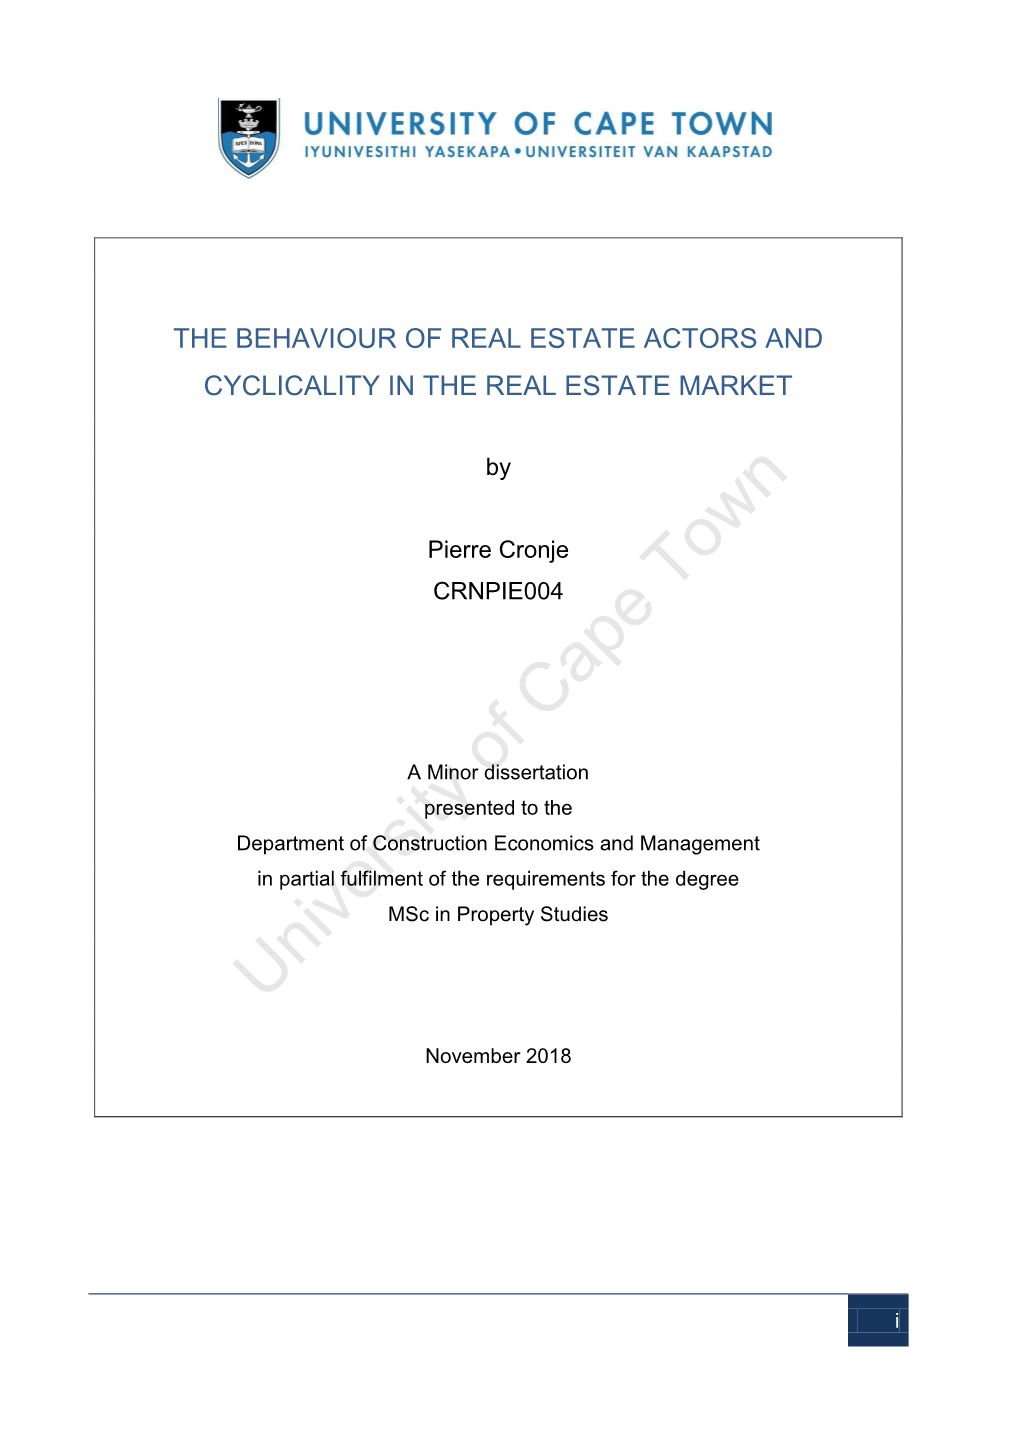 The Behaviour of Real Estate Actors and Cyclicality in the Real Estate Market